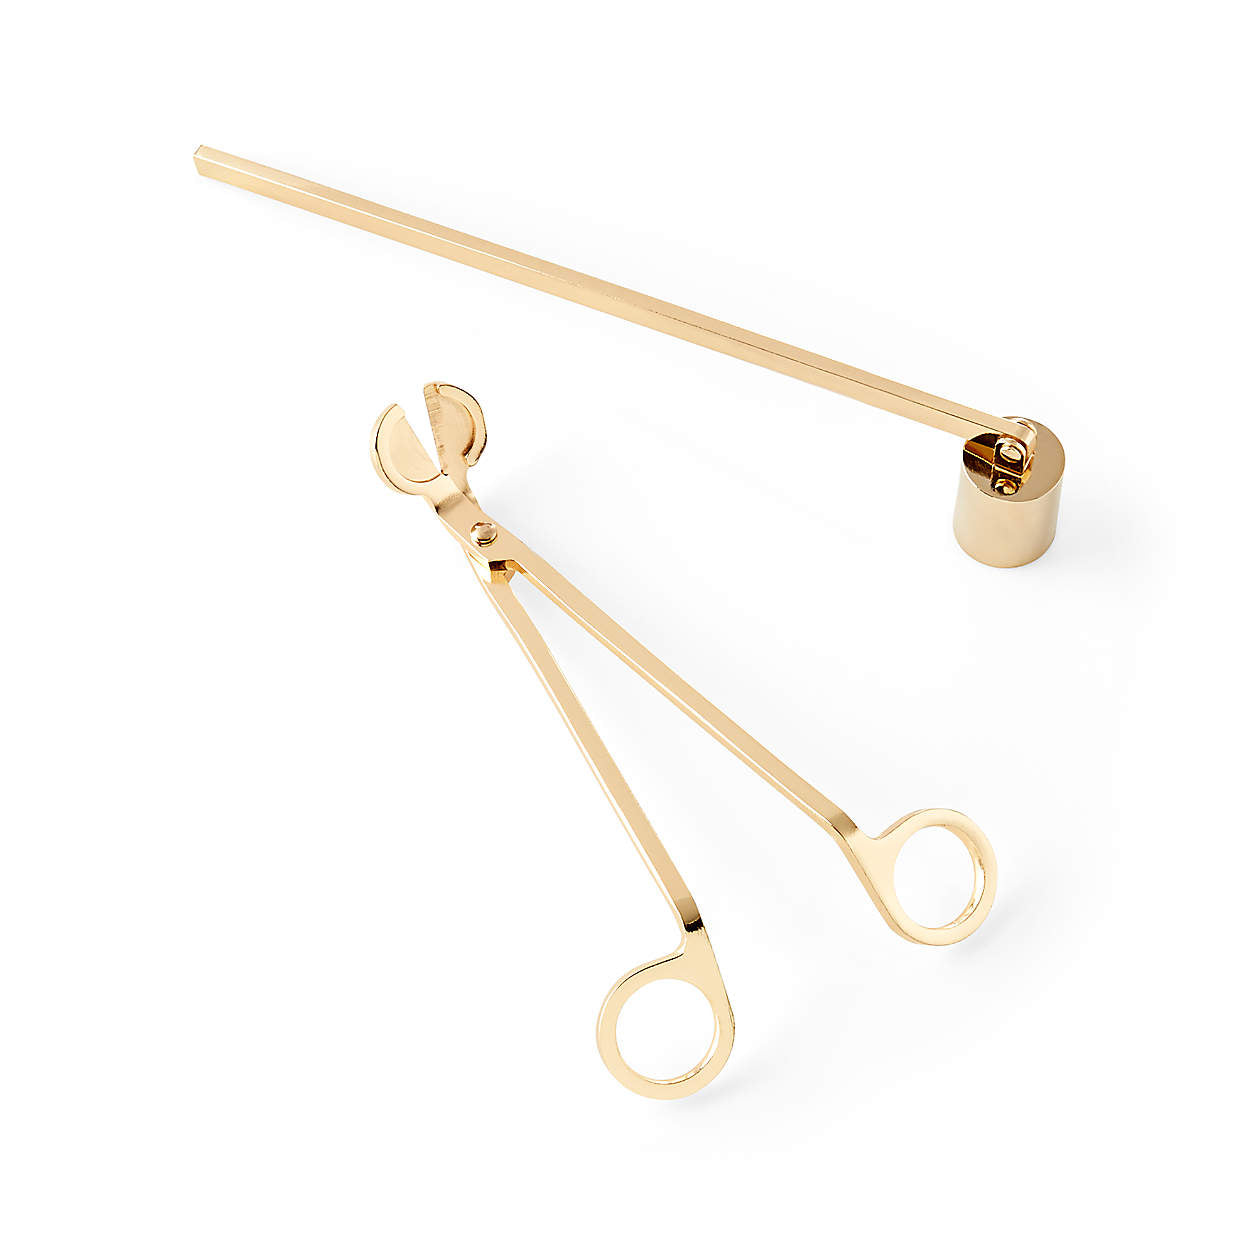 Rogue Paq Gold Toned Candle Snuffer